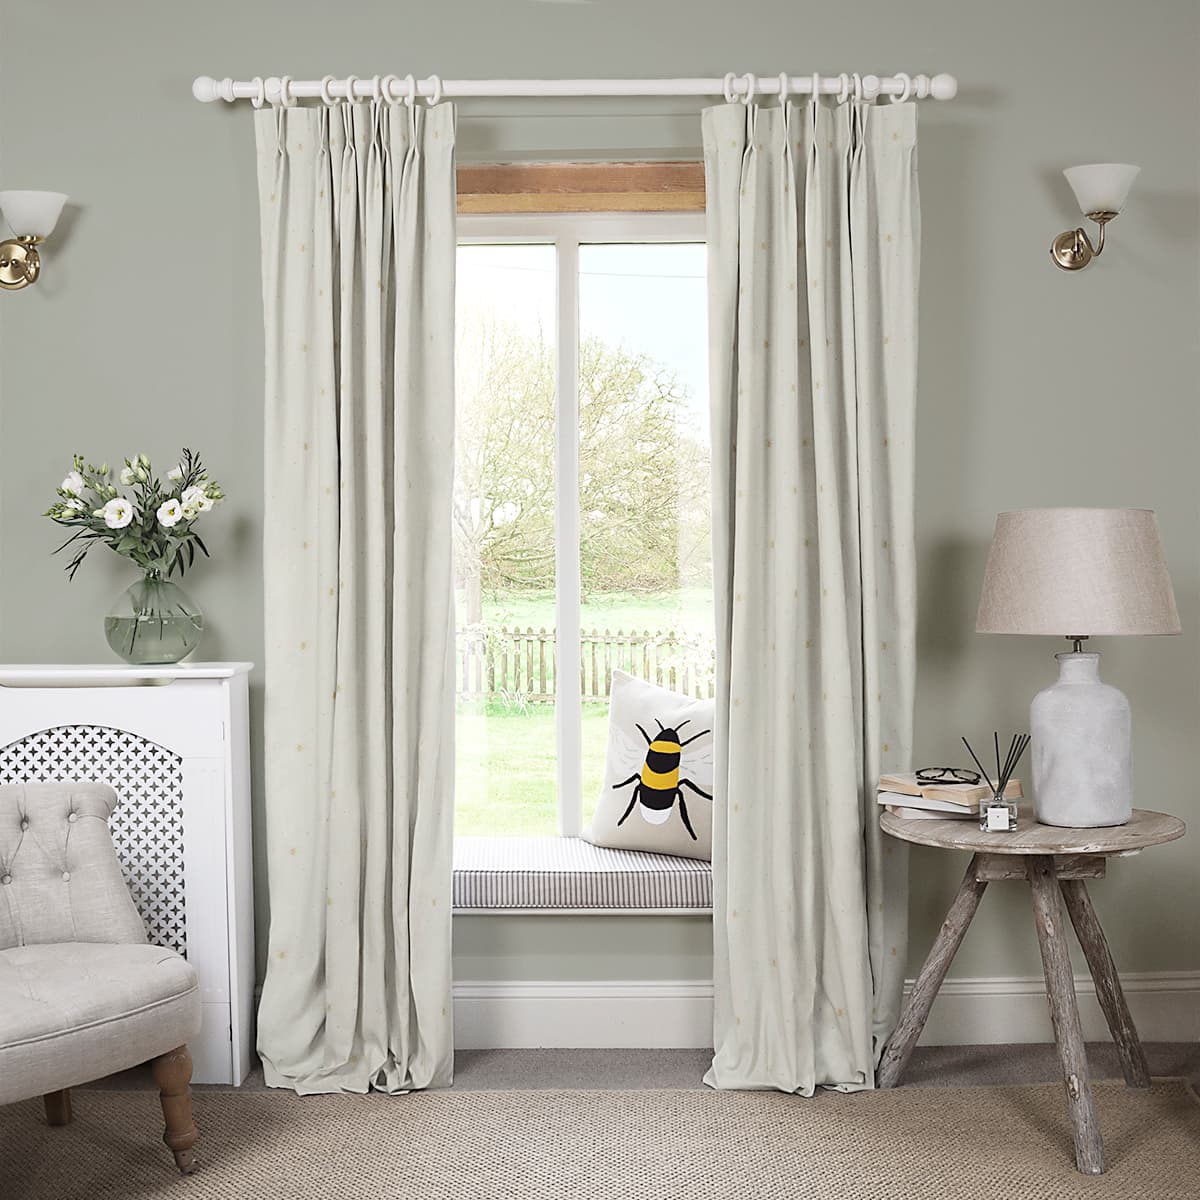 Bees Ochre Made to Measure Curtains